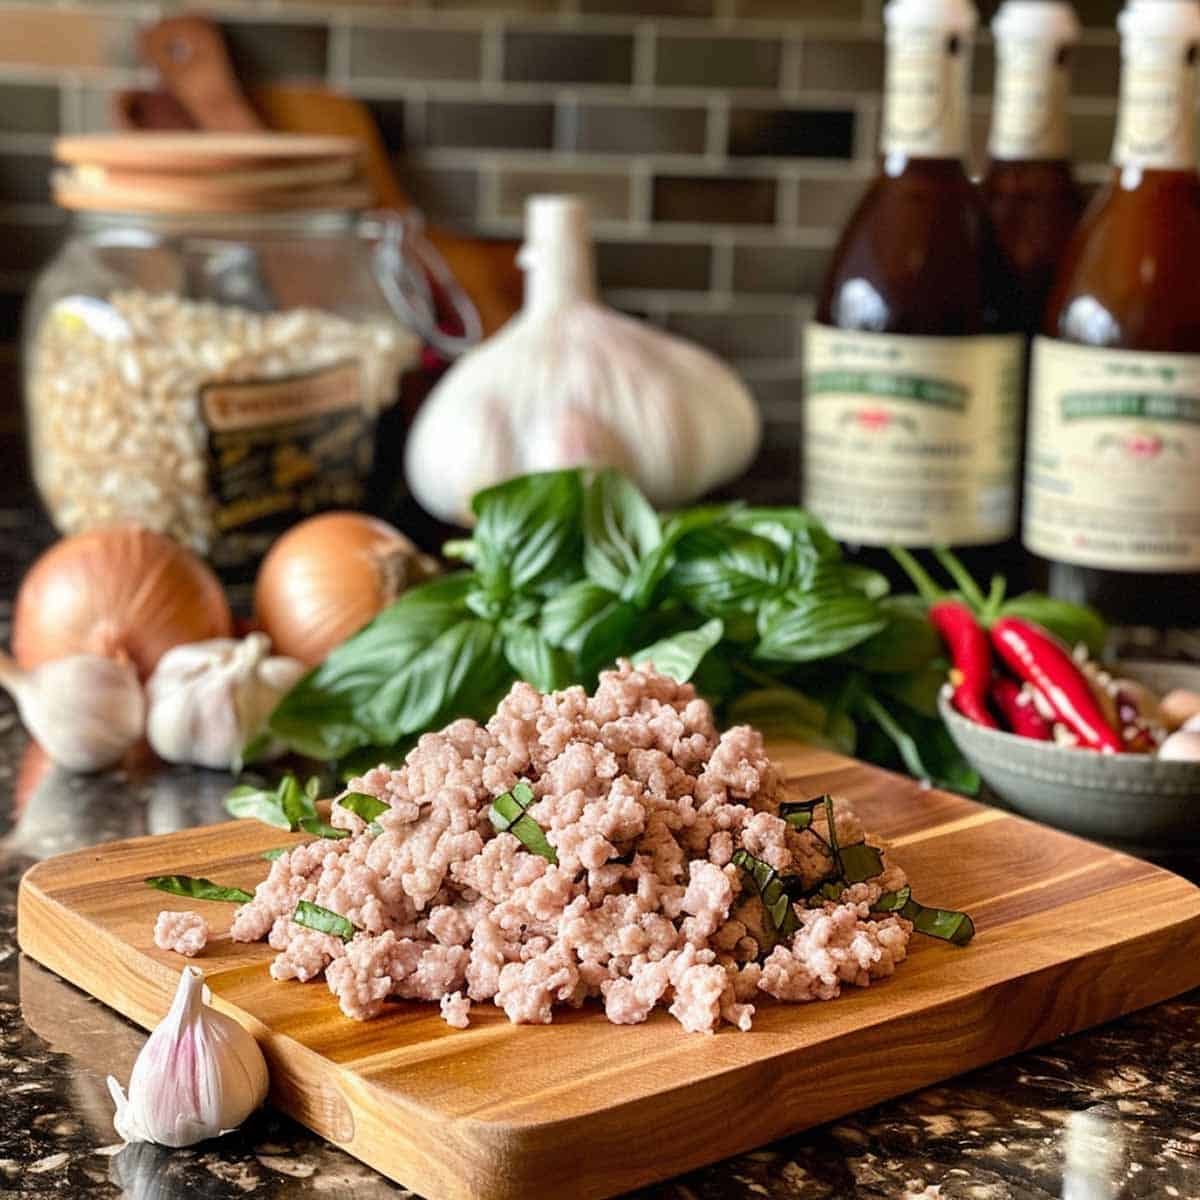 Ground pork on a cutting board surrounded by key ingredients for Thai Basil Pork recipe (Pad Kra Pao Moo).